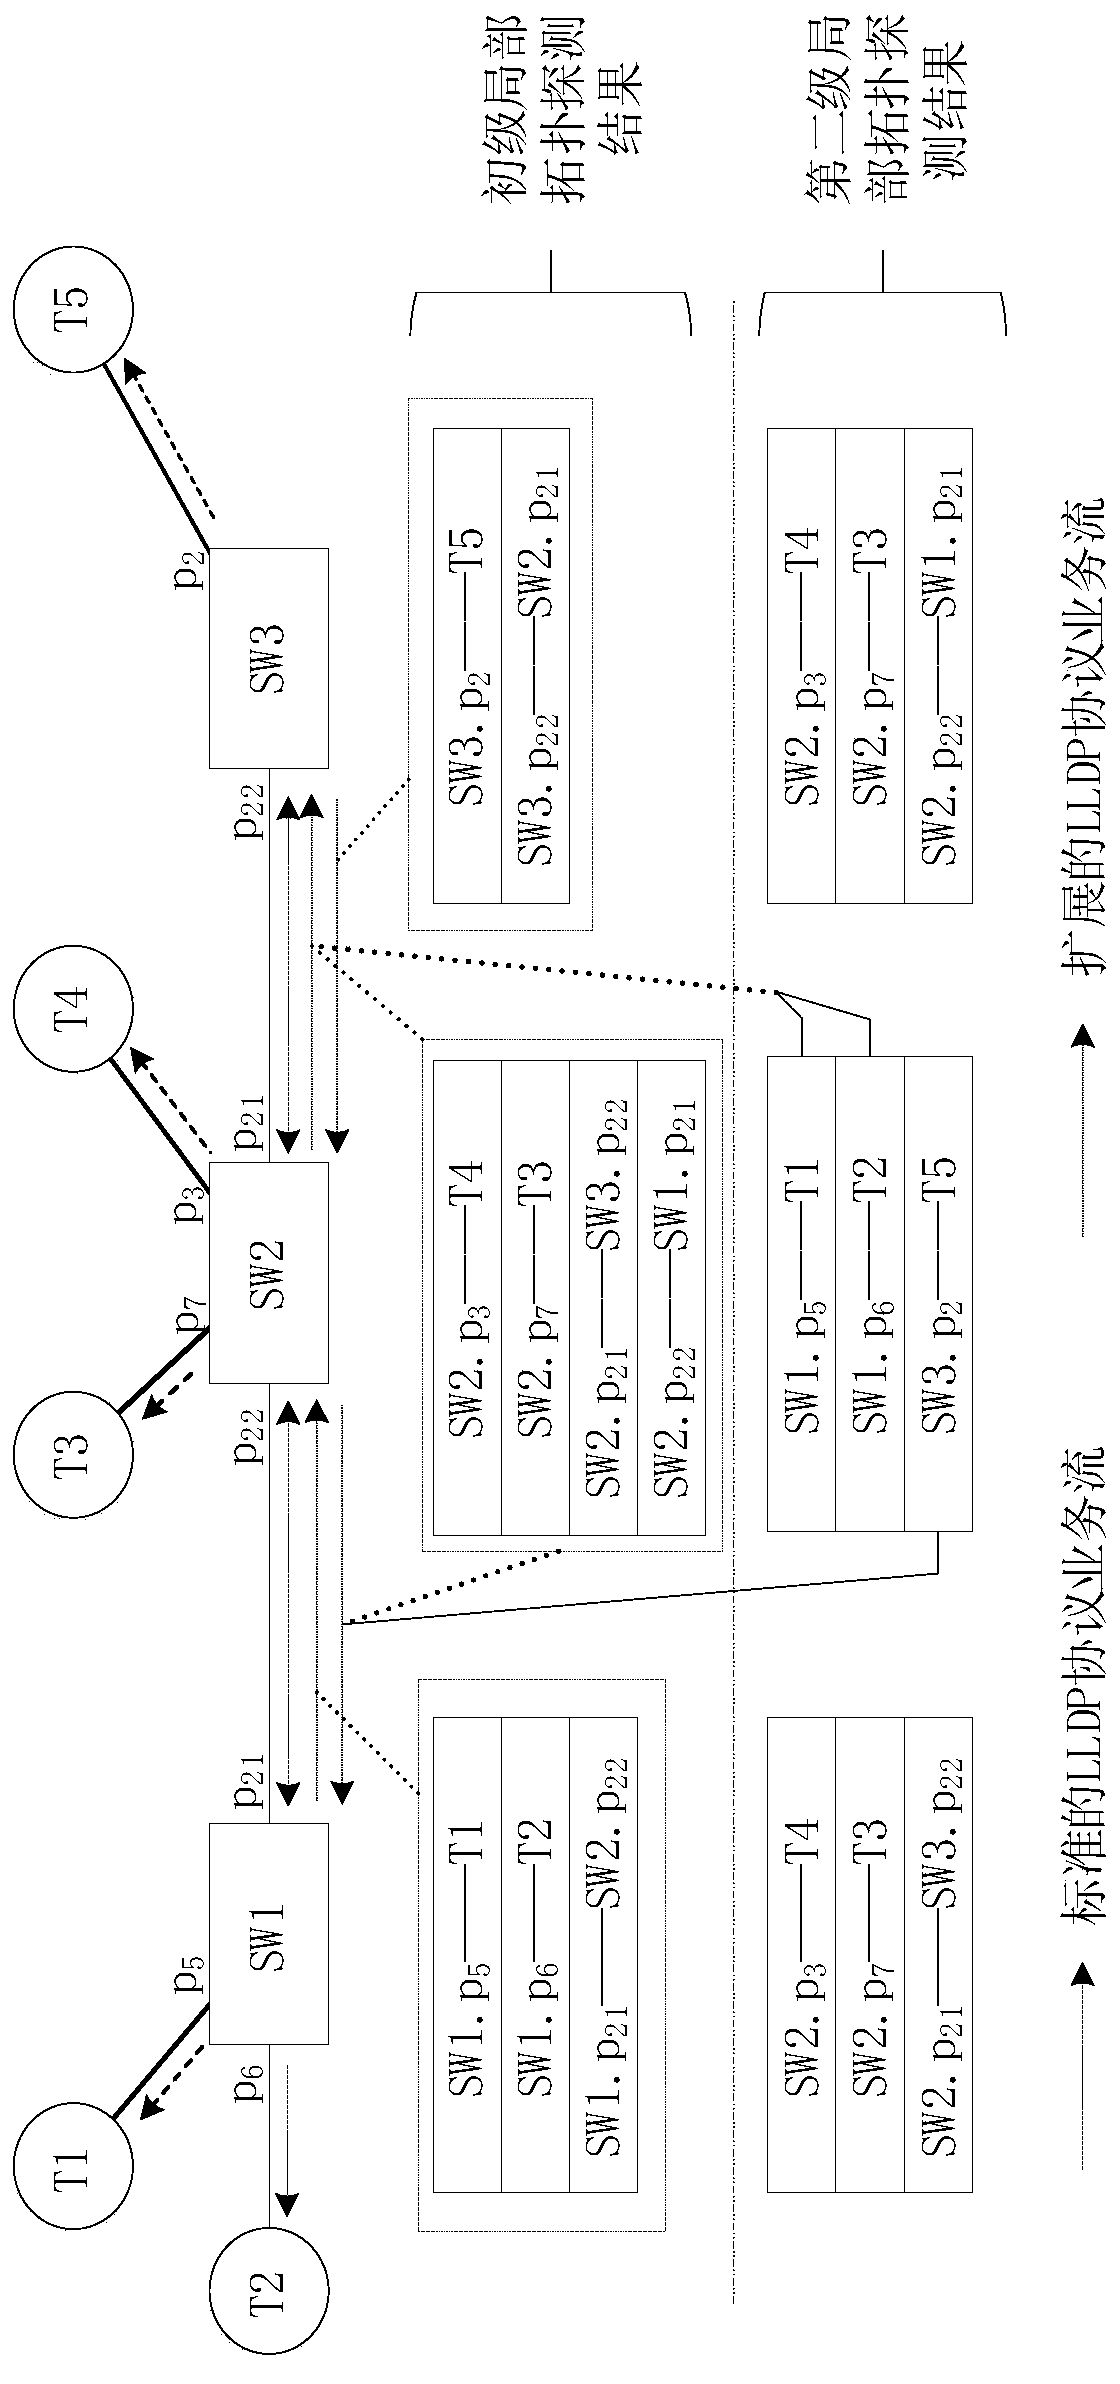 Intelligent substation network topology step-by-step sniffing method based on LLDP protocol